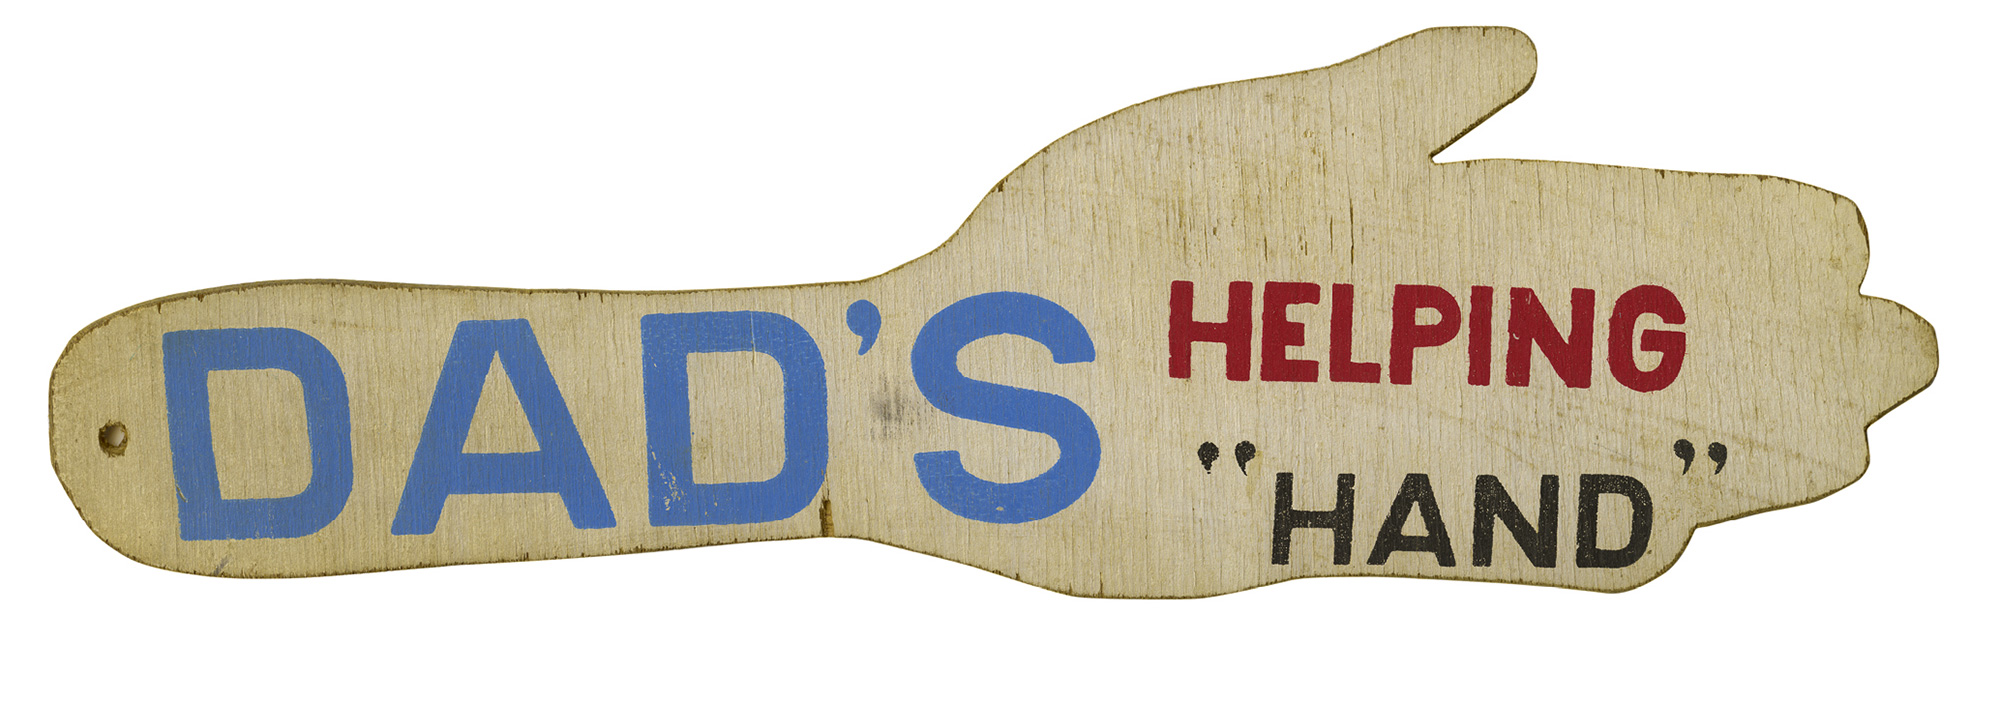 A wooden paddle shaped like a hand, made for corporal punishment, painted with the words “Dad’s helping hand.”